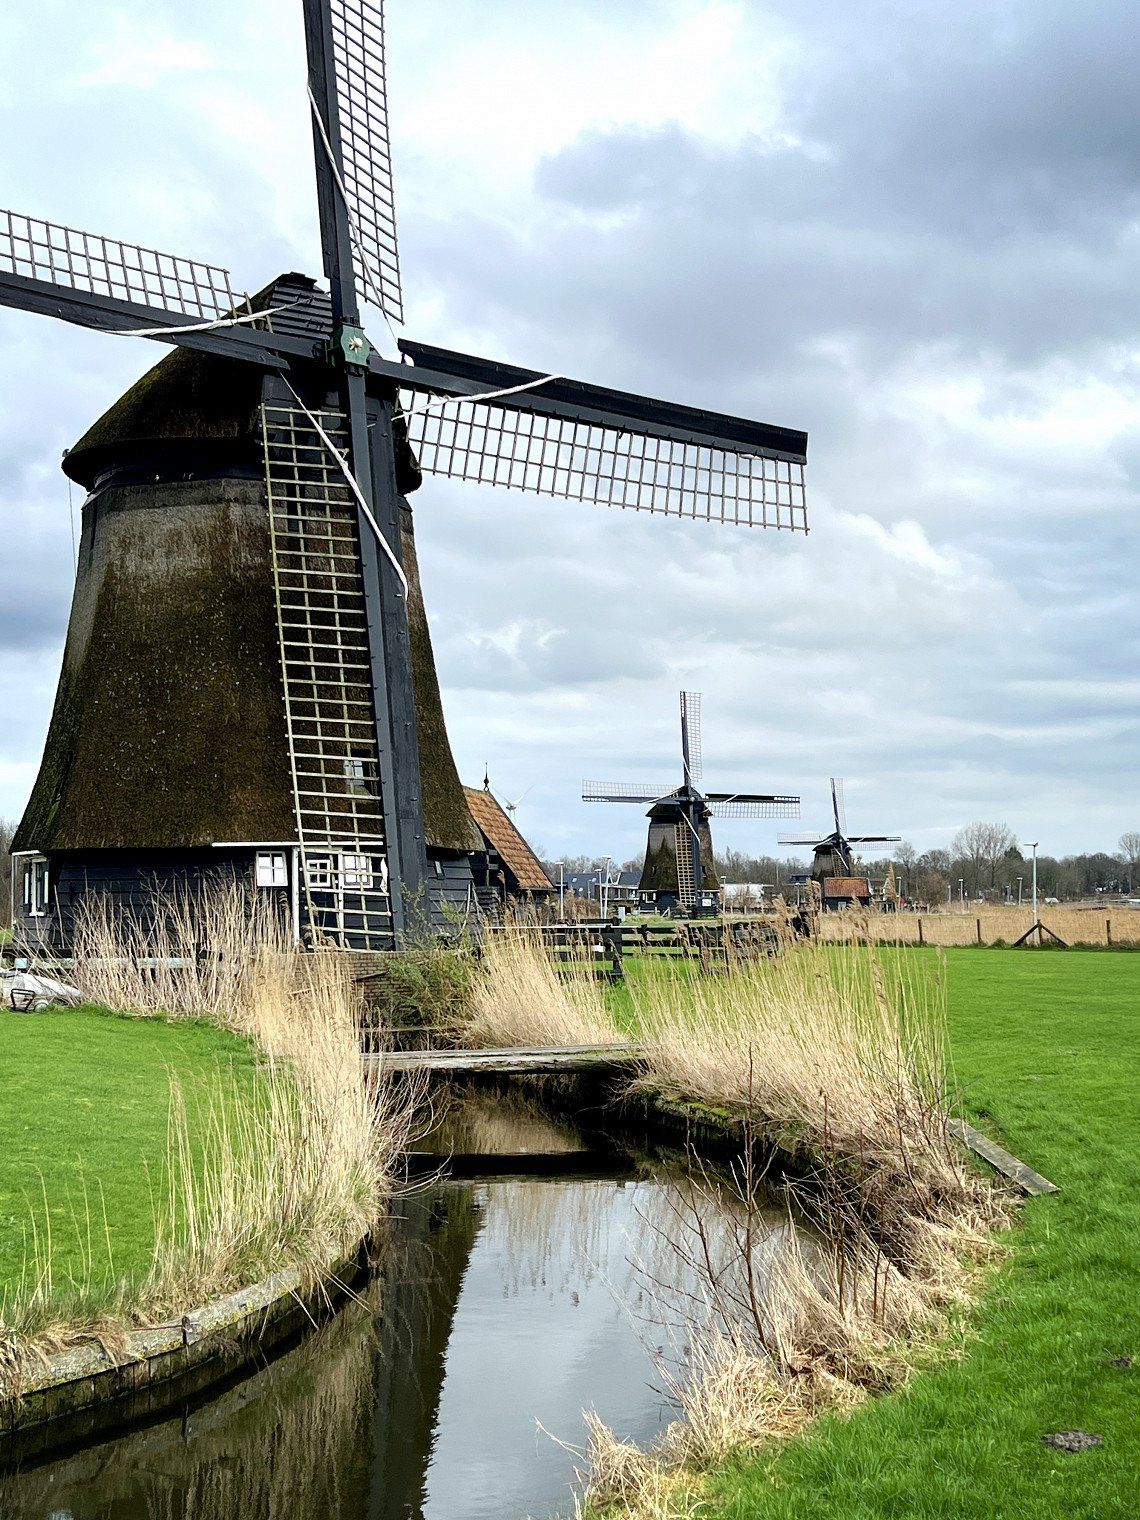 Small discovery tour in the Netherlands…